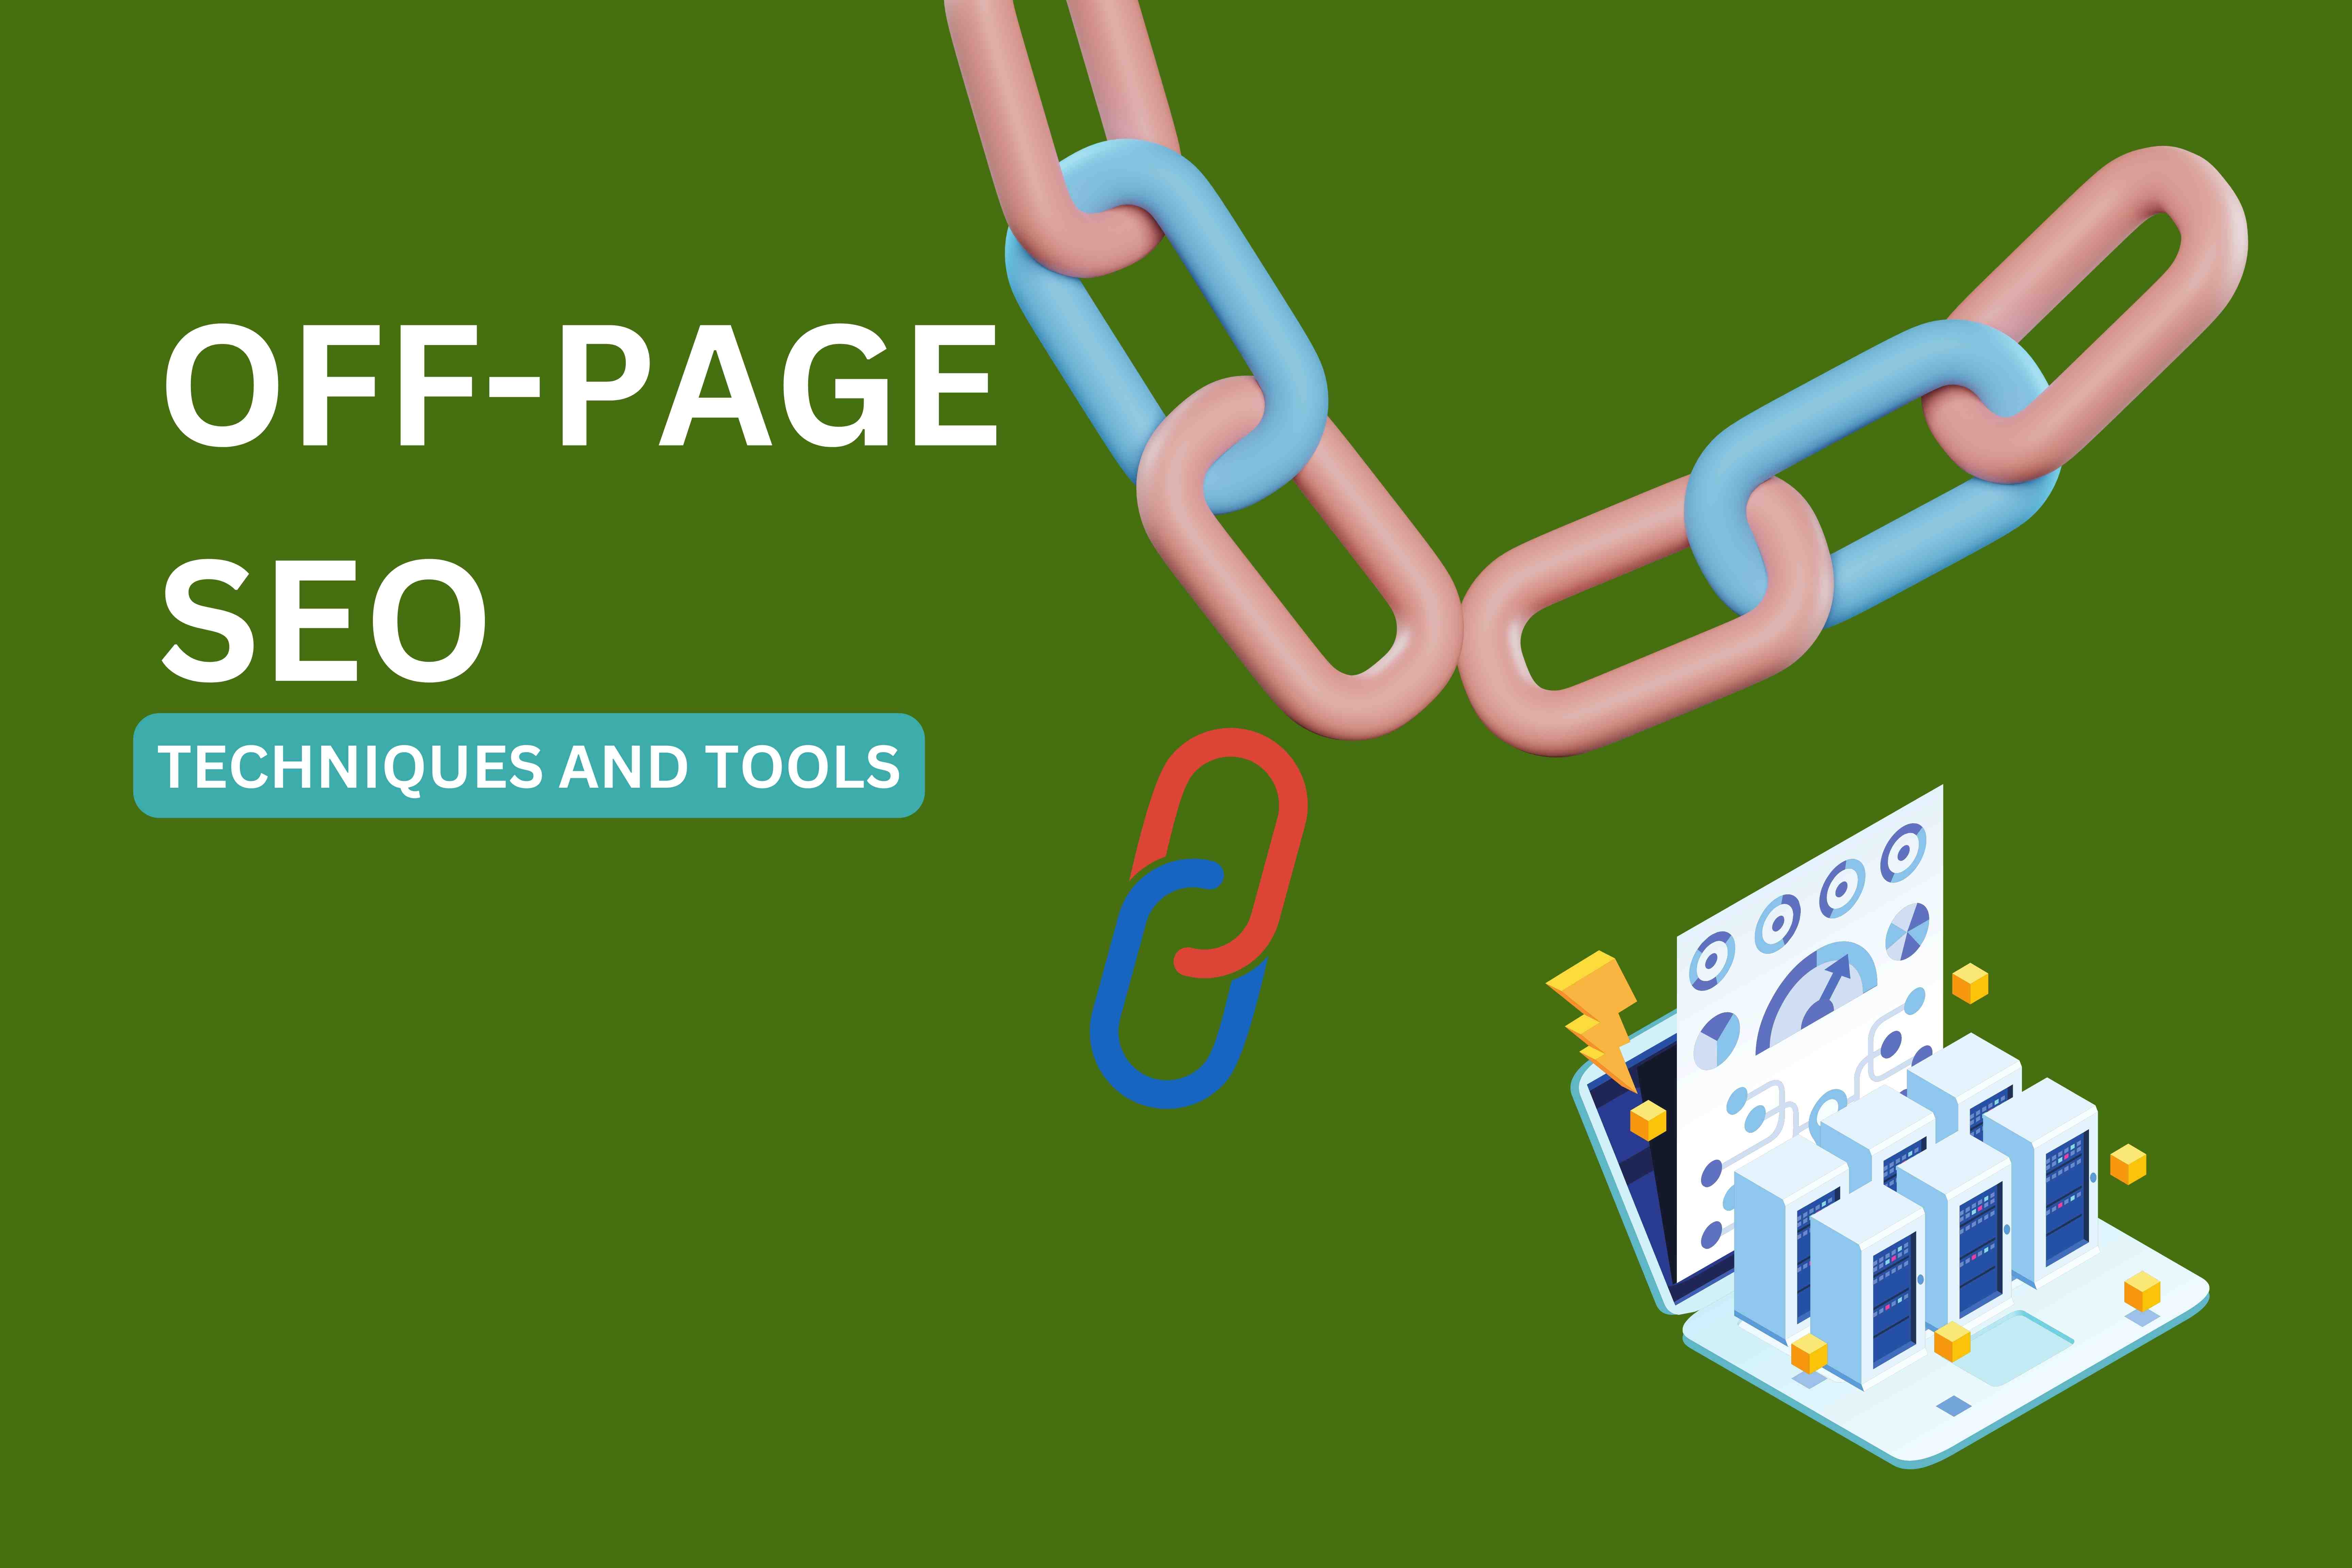 Off-Page SEO Tools: Building Backlinks and Authority